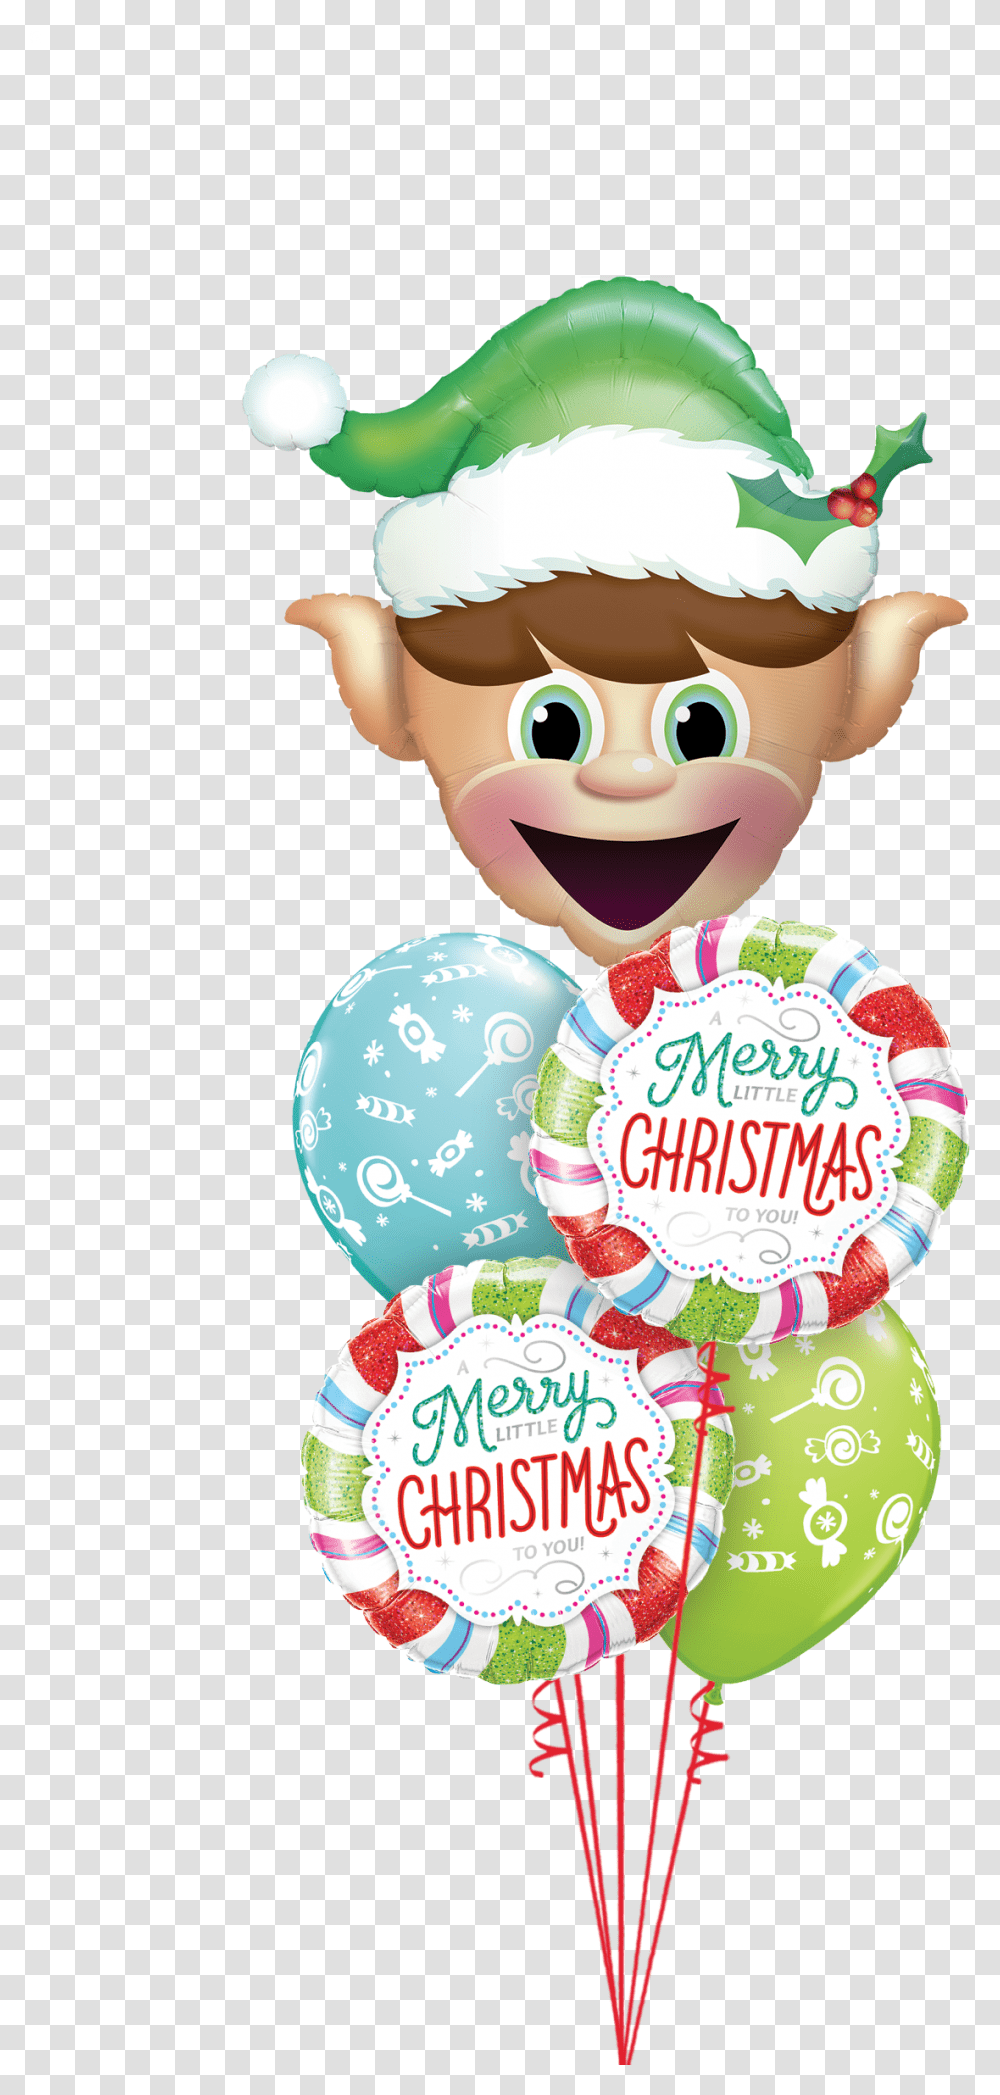 Merry Little Christmas To You Balloon Clipart Balloon, Sweets, Food, Person, Cream Transparent Png